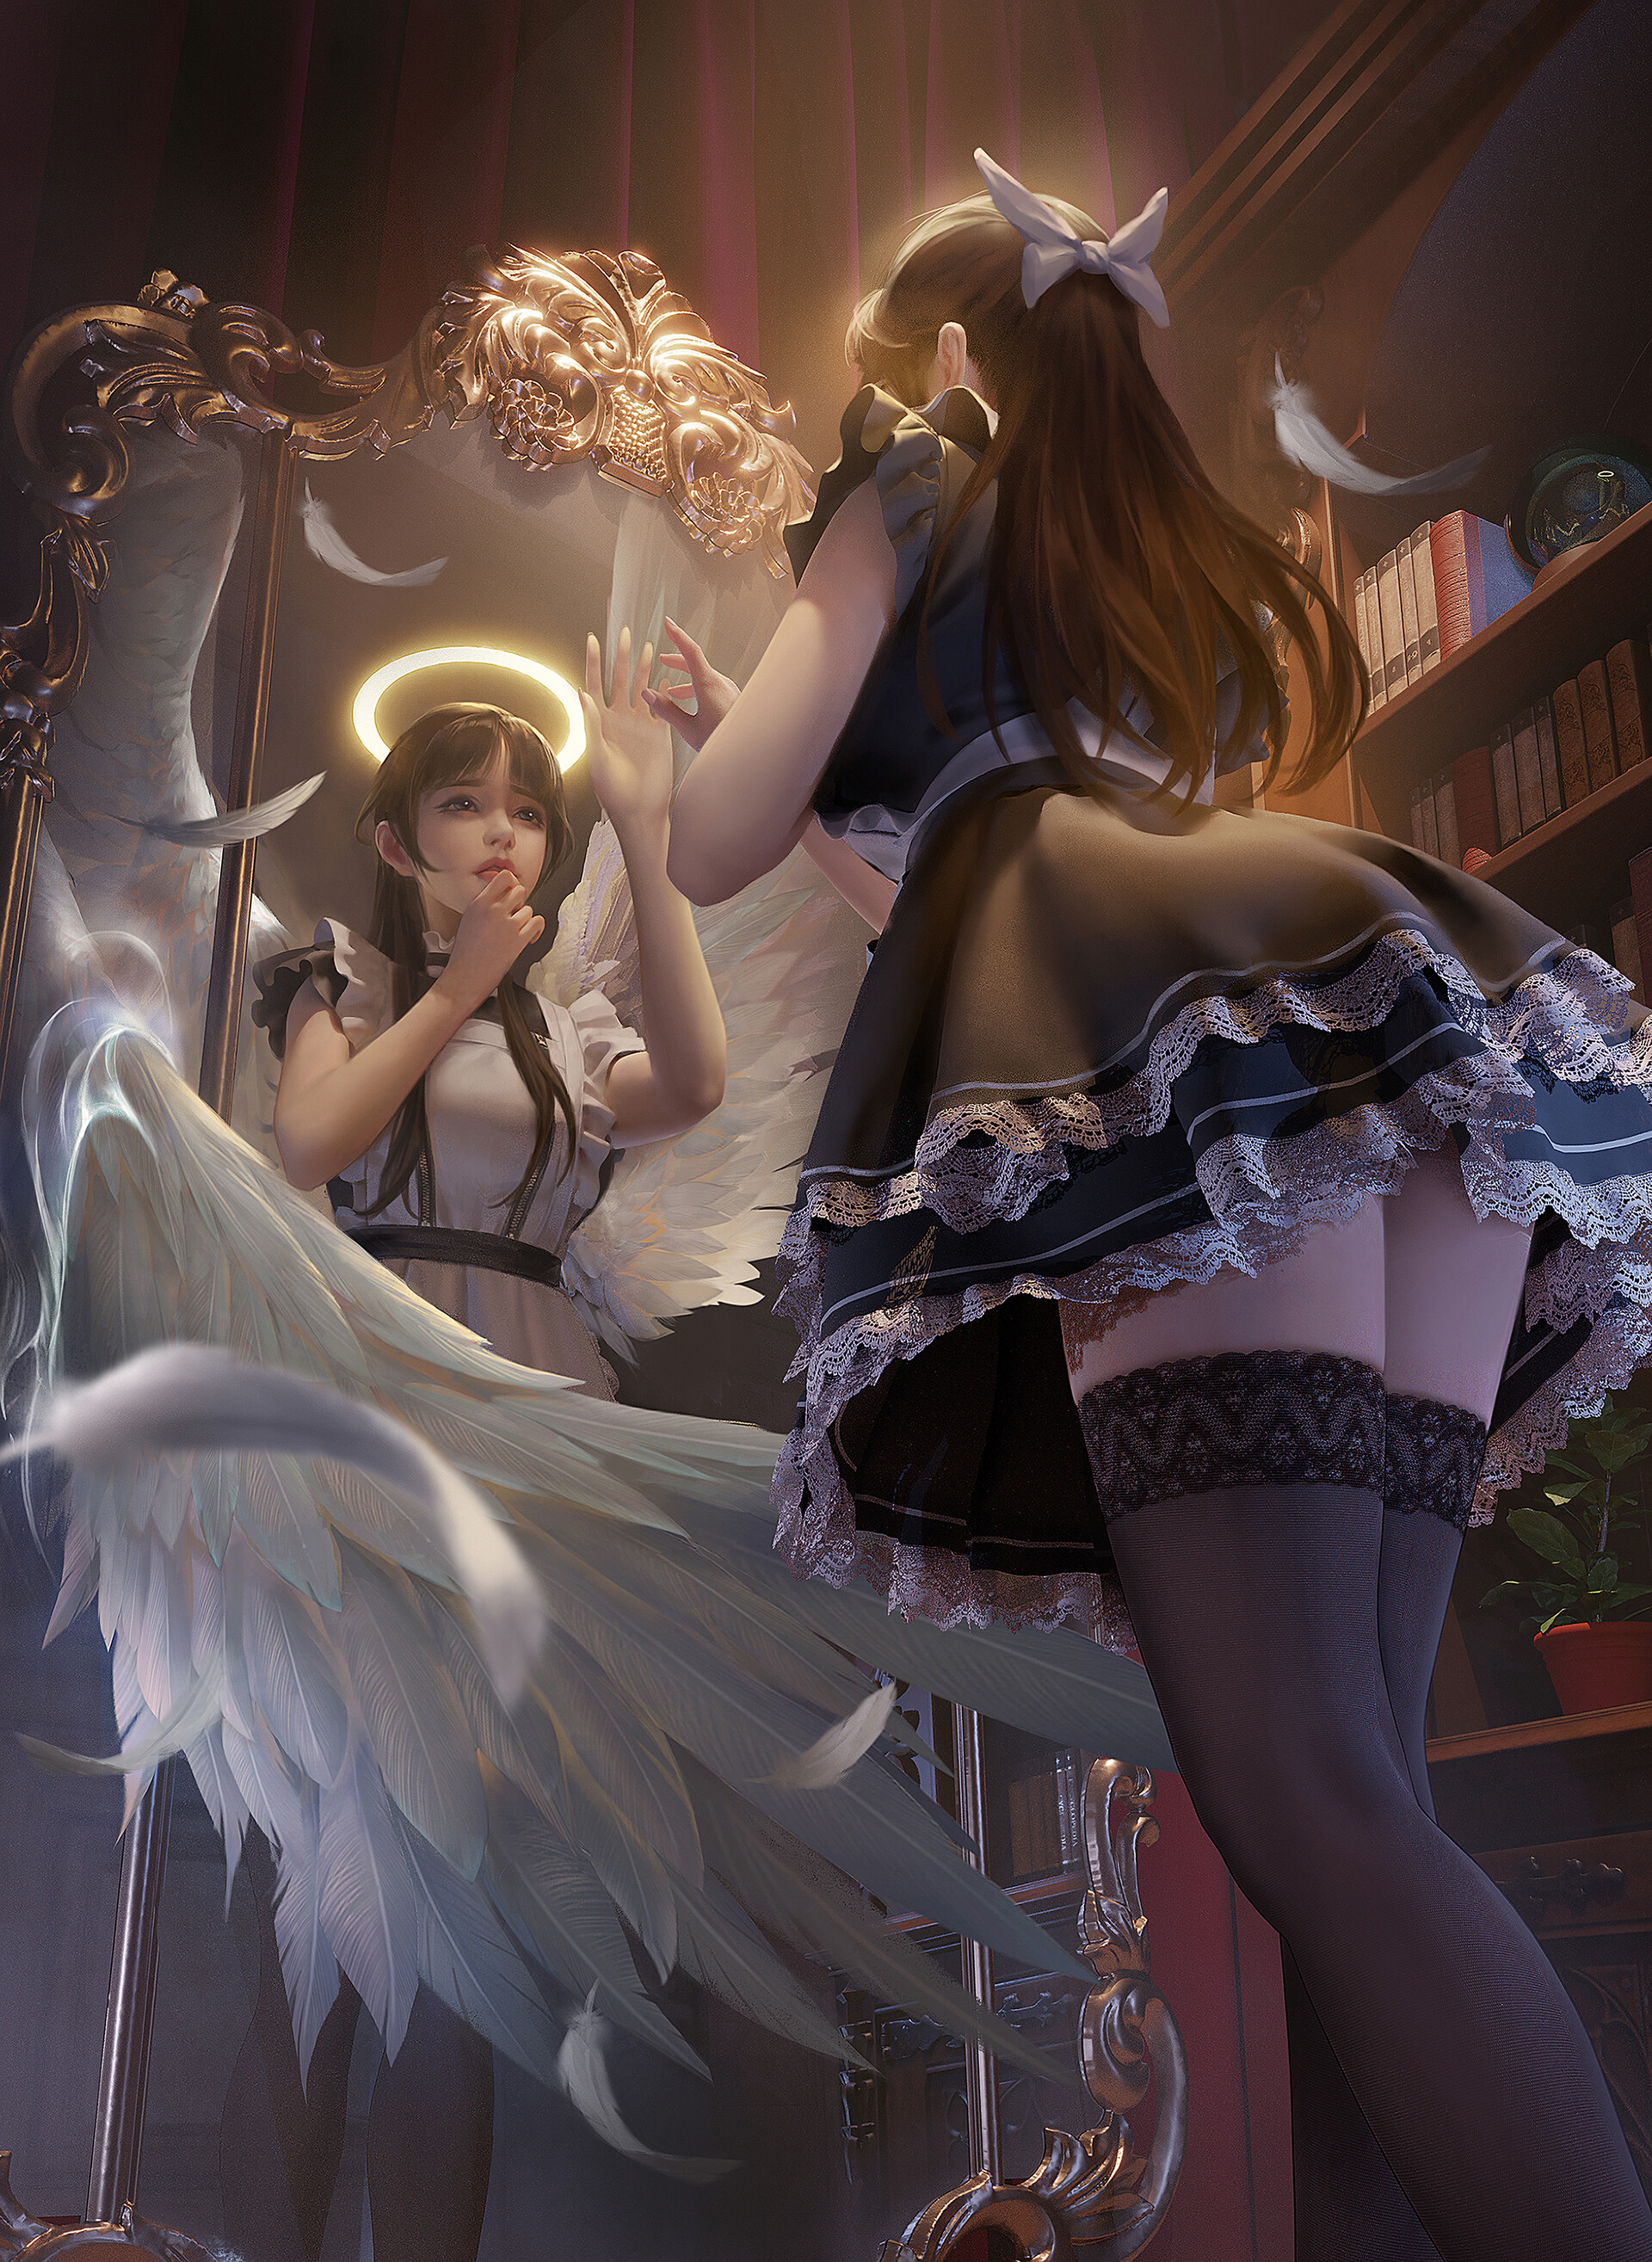 General 1920x2629 angel artwork anime anime girls maid outfit stockings